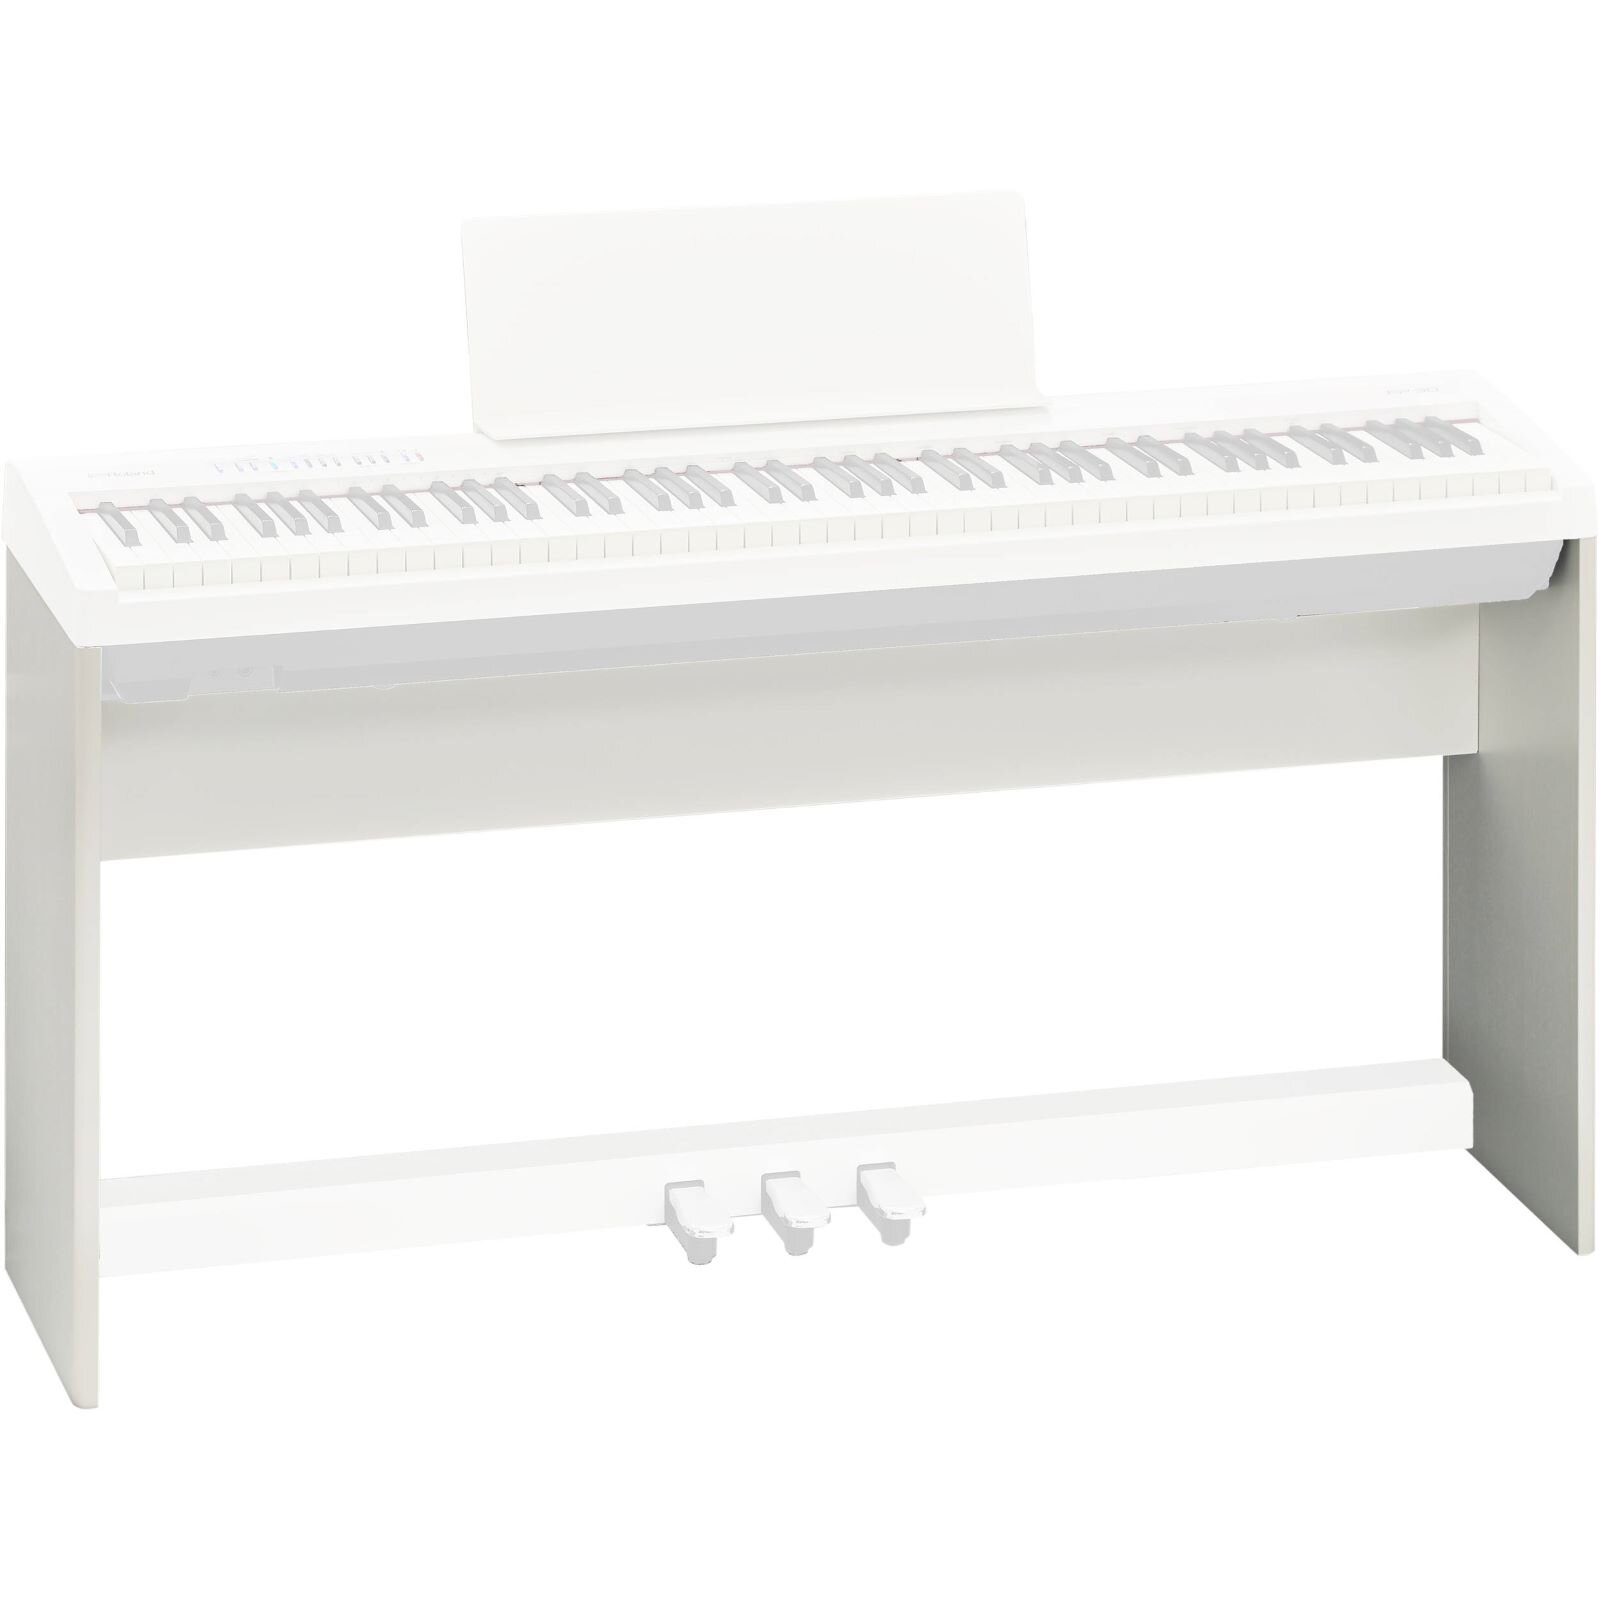 Roland KSC-70-WH Stand FP-30 White : photo 1